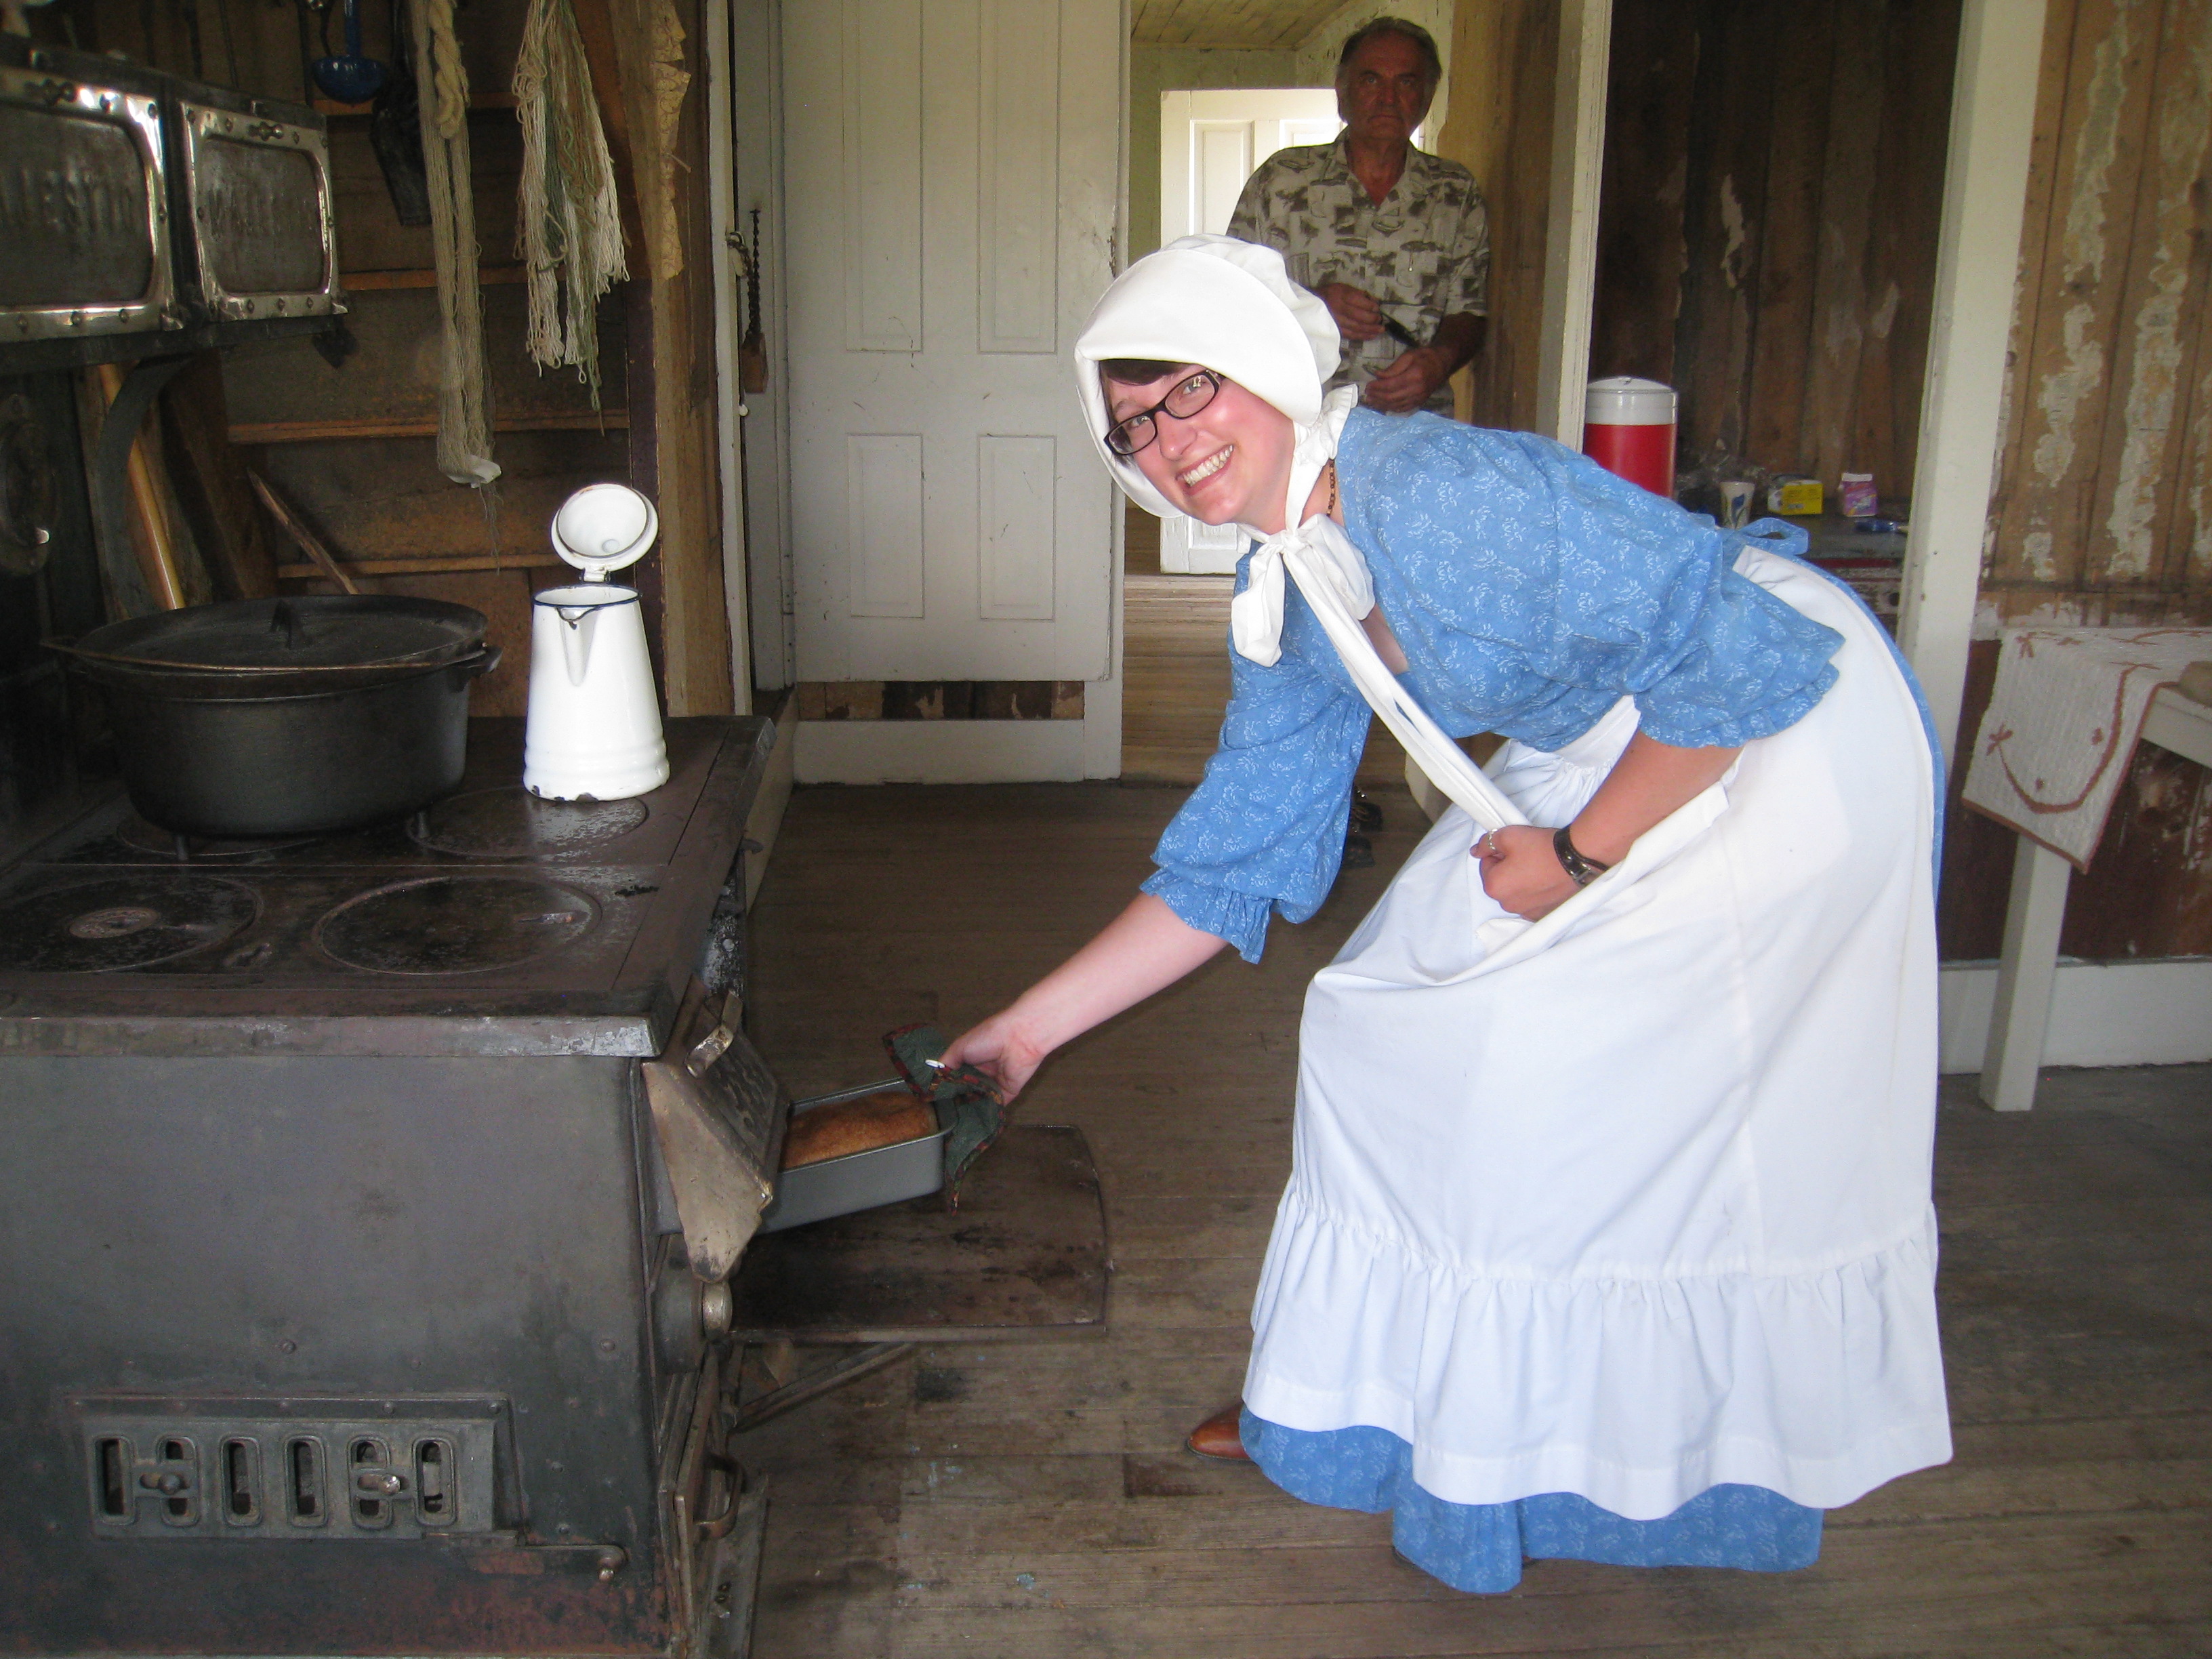 Park staff, dressed in late 1800s clothing, prepare fresh bread in the woodstove